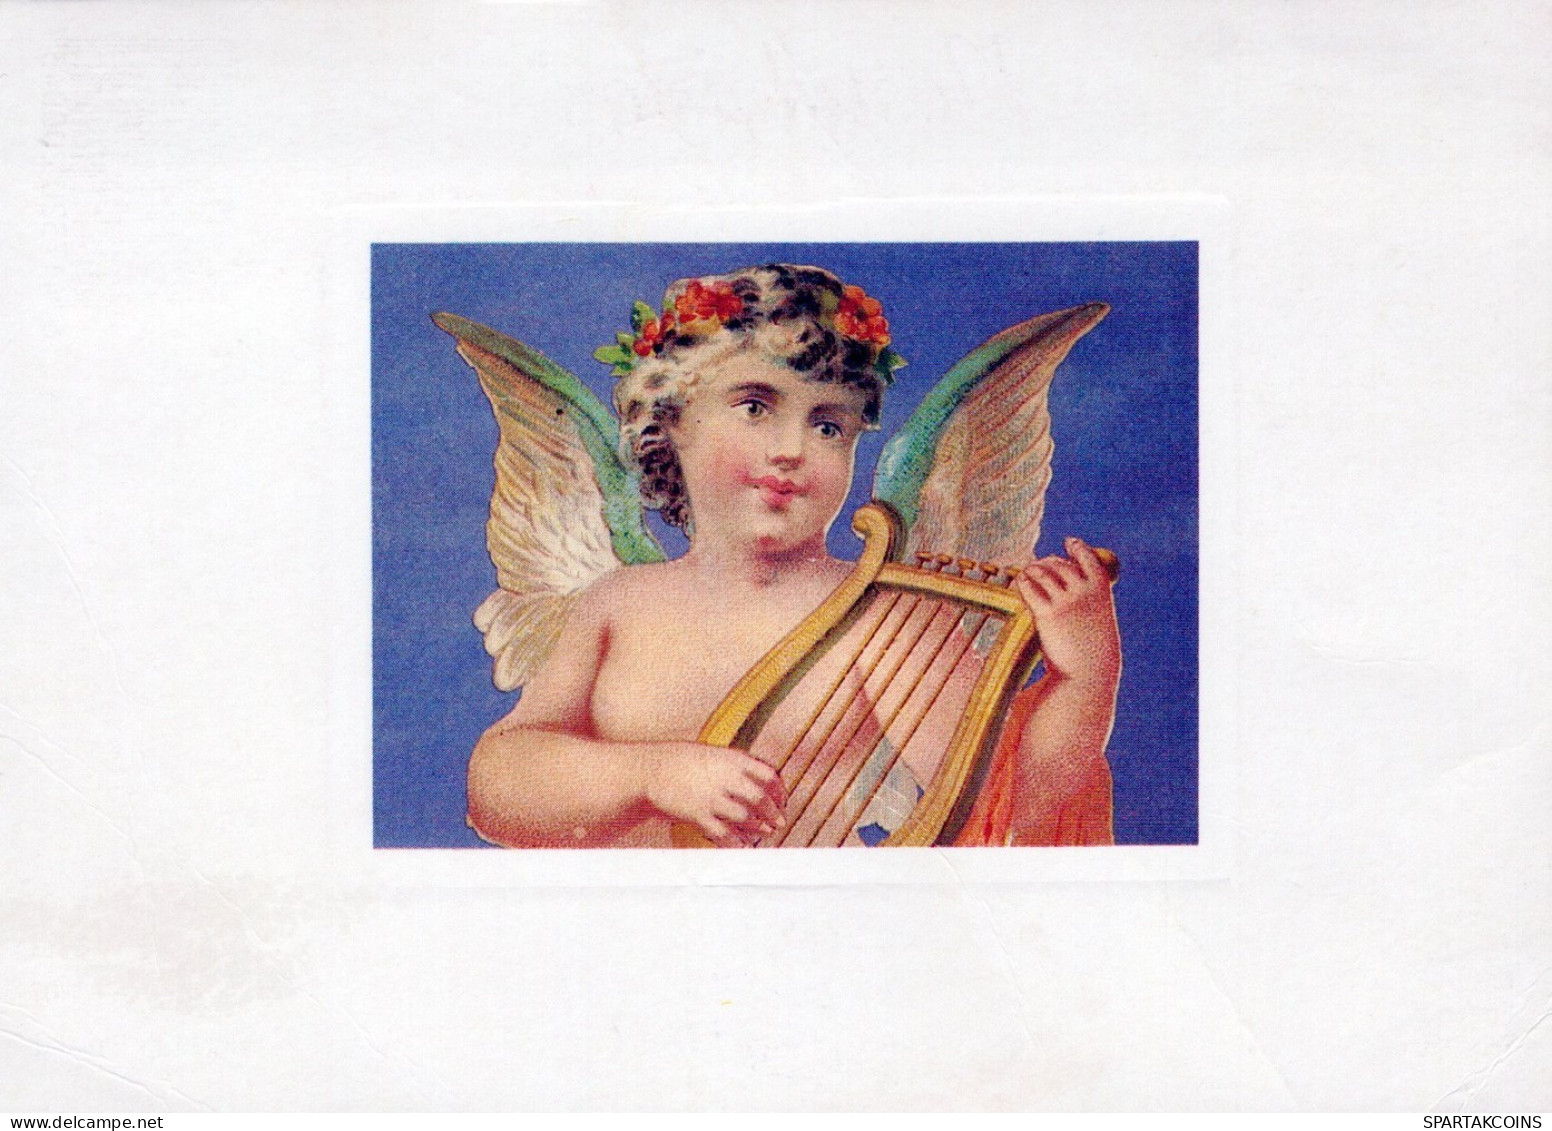 ANGELO Buon Anno Natale Vintage Cartolina CPSM #PAH326.IT - Angels